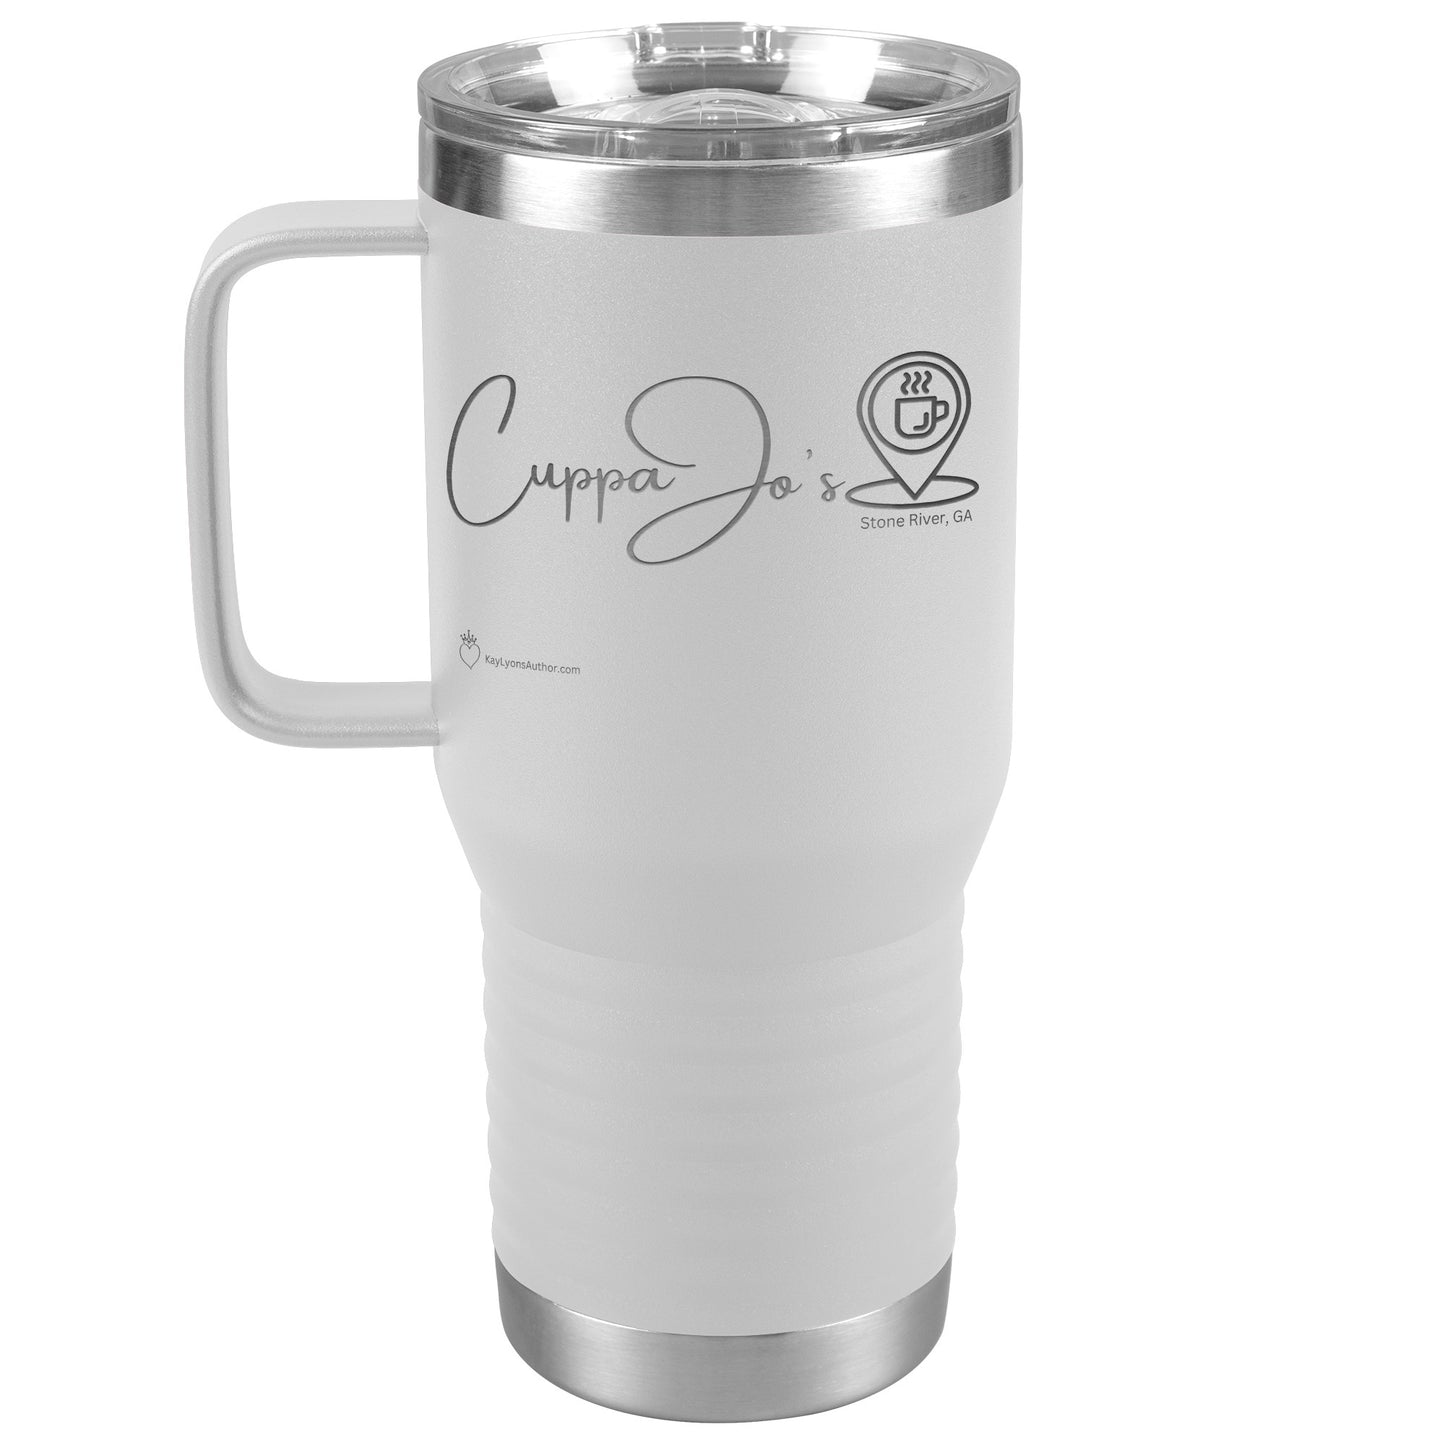 Cuppa Jo's Tumbler as featured in the Stone River Series